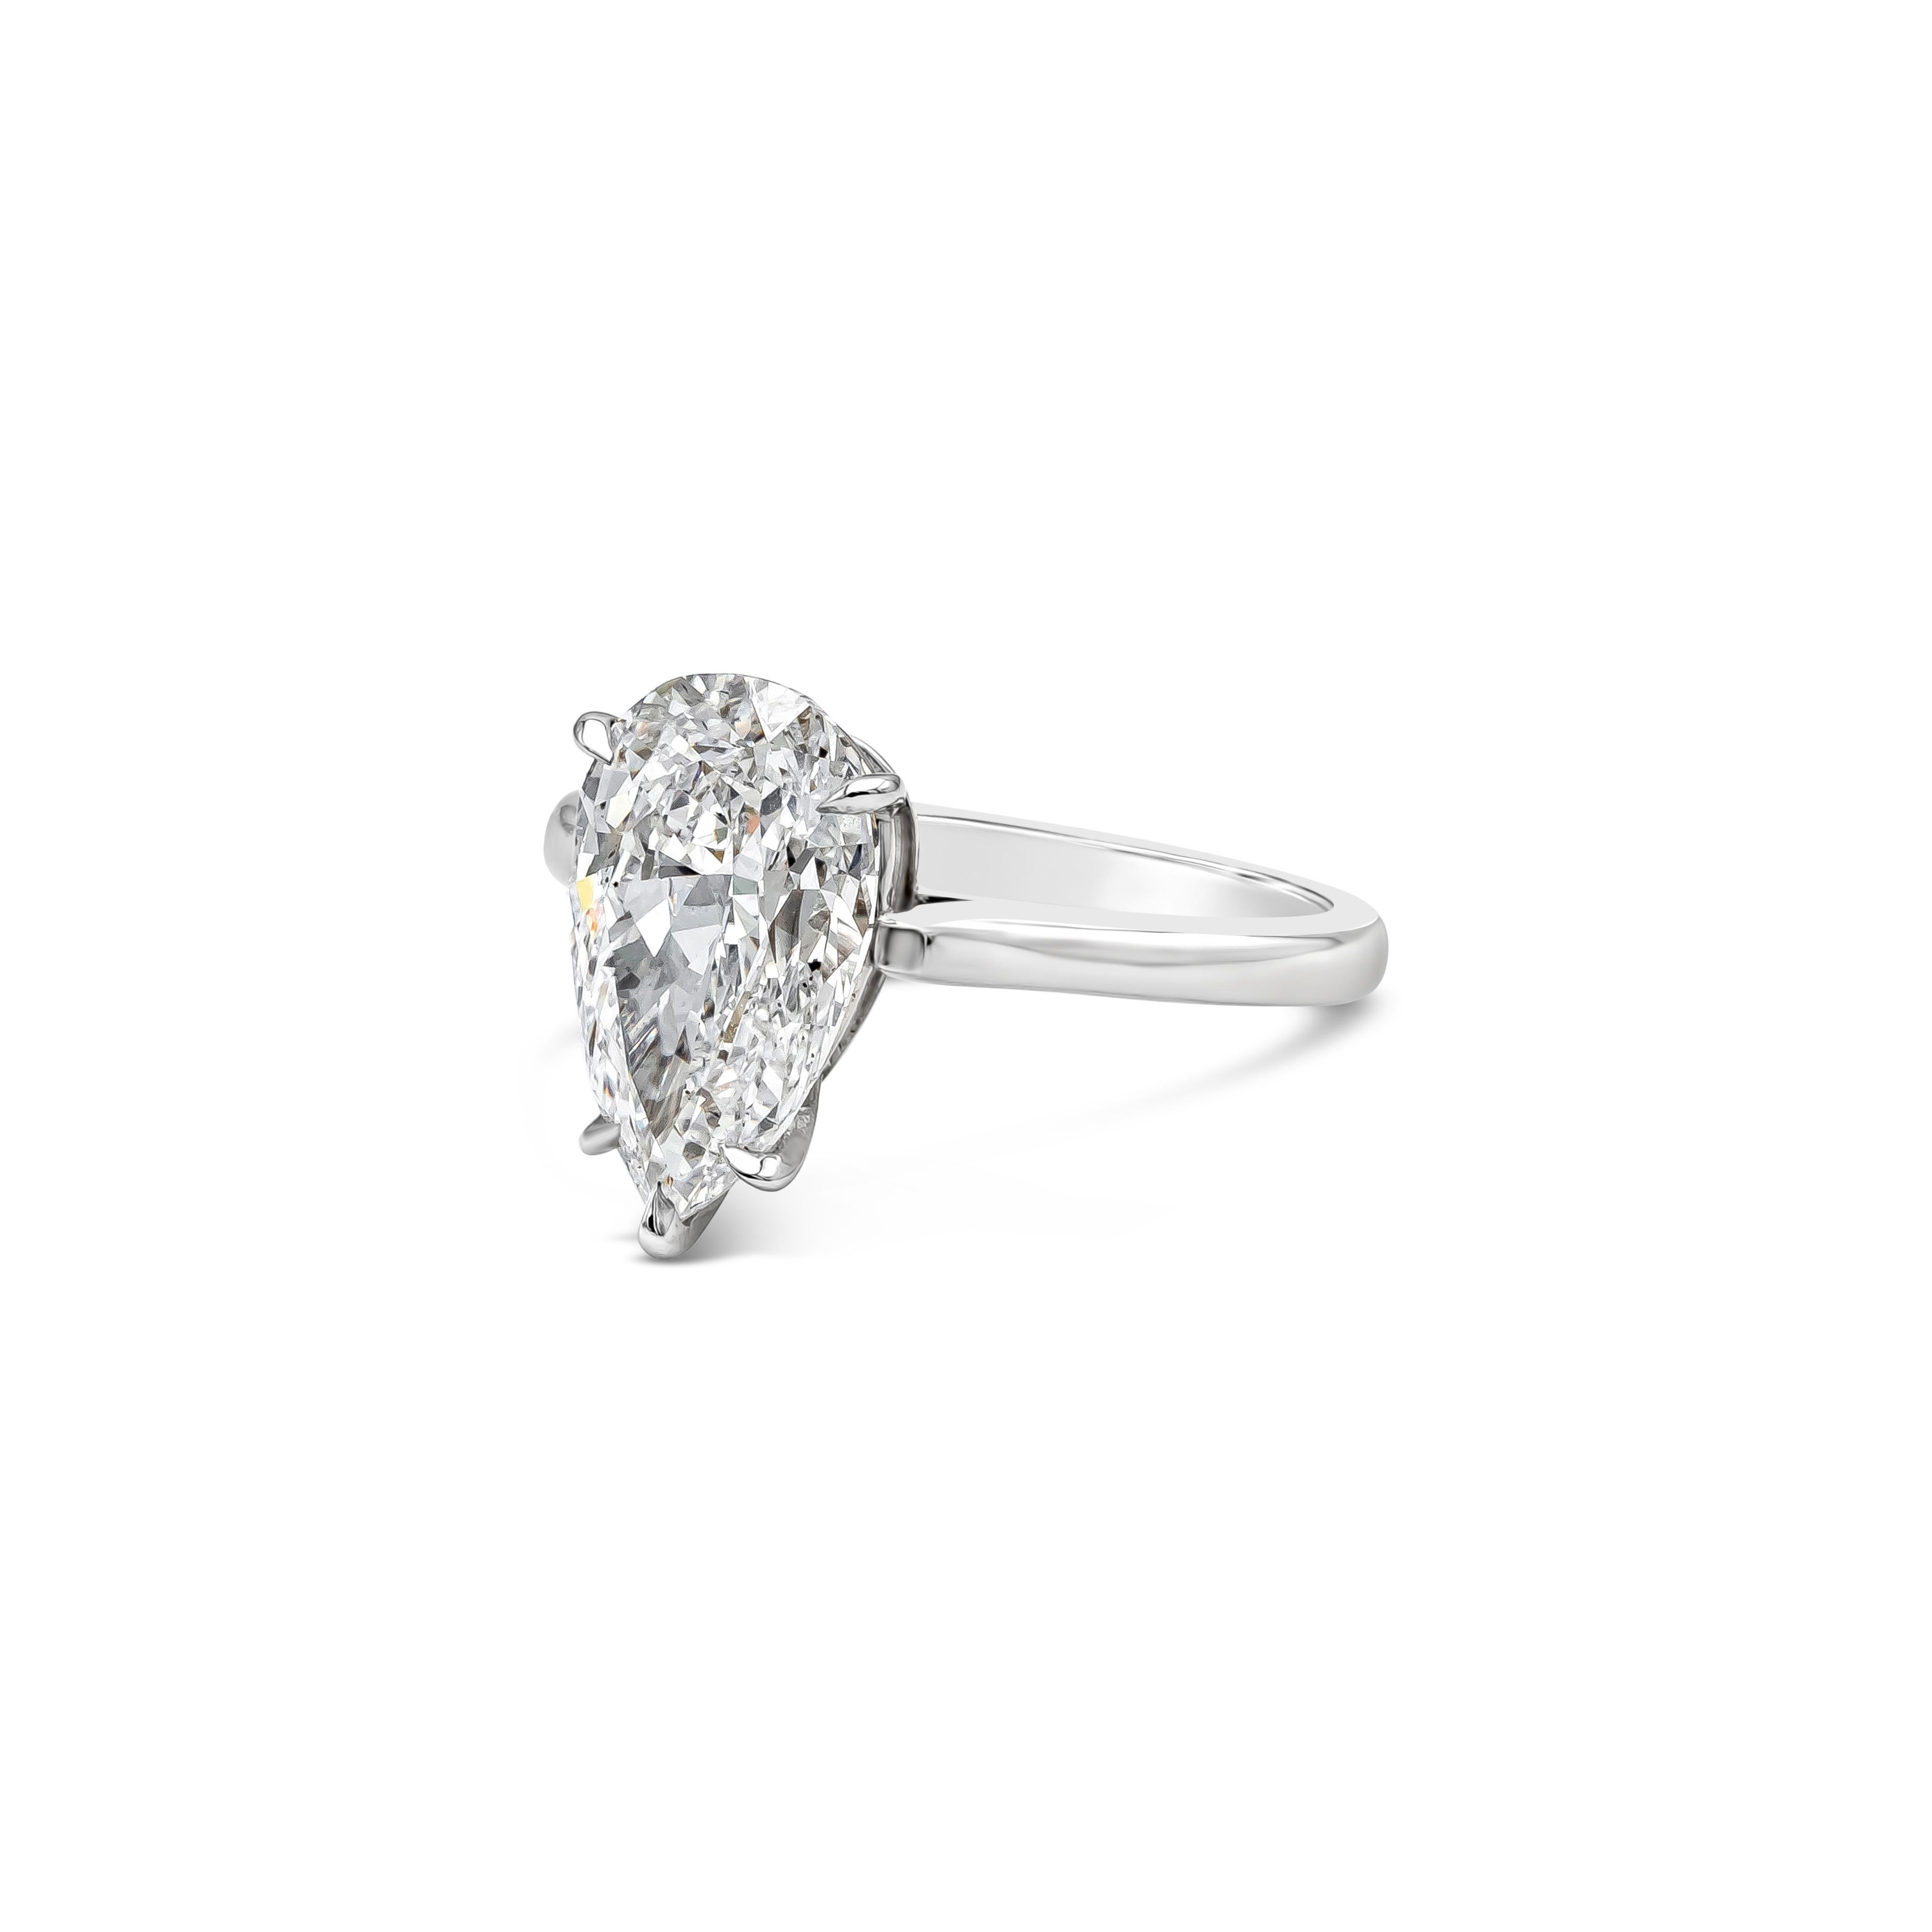 This simple and elegant solitaire engagement ring features a 3.27 carats total pear shape diamond certified by GIA as D color, SI2 in clarity. Set in a platinum five prong setting. Finely made in platinum. Size 6 US resizable upon request.

Style